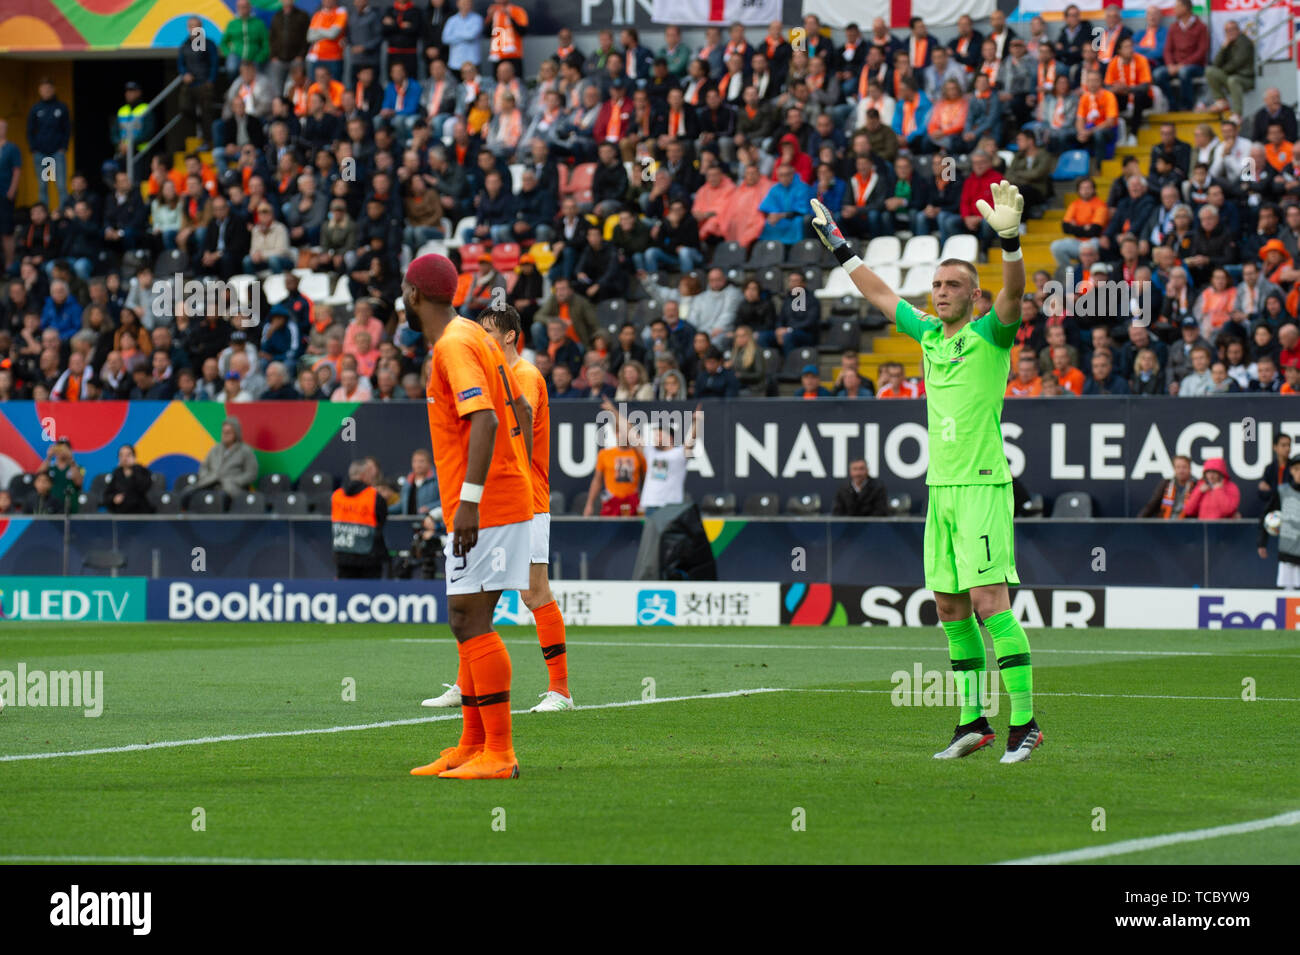 GUIMARES, PORTUGAL 6TH JUNE Jasper Cillessen of the Netherlands during the UEFA Nations League match between Netherlands and England at Estádio D. Afonso Henriques, Guimarães, Portugal on Thursday 6th June 2019. (Credit: Pat Scaasi | MI News ) Credit: MI News & Sport /Alamy Live News Stock Photo